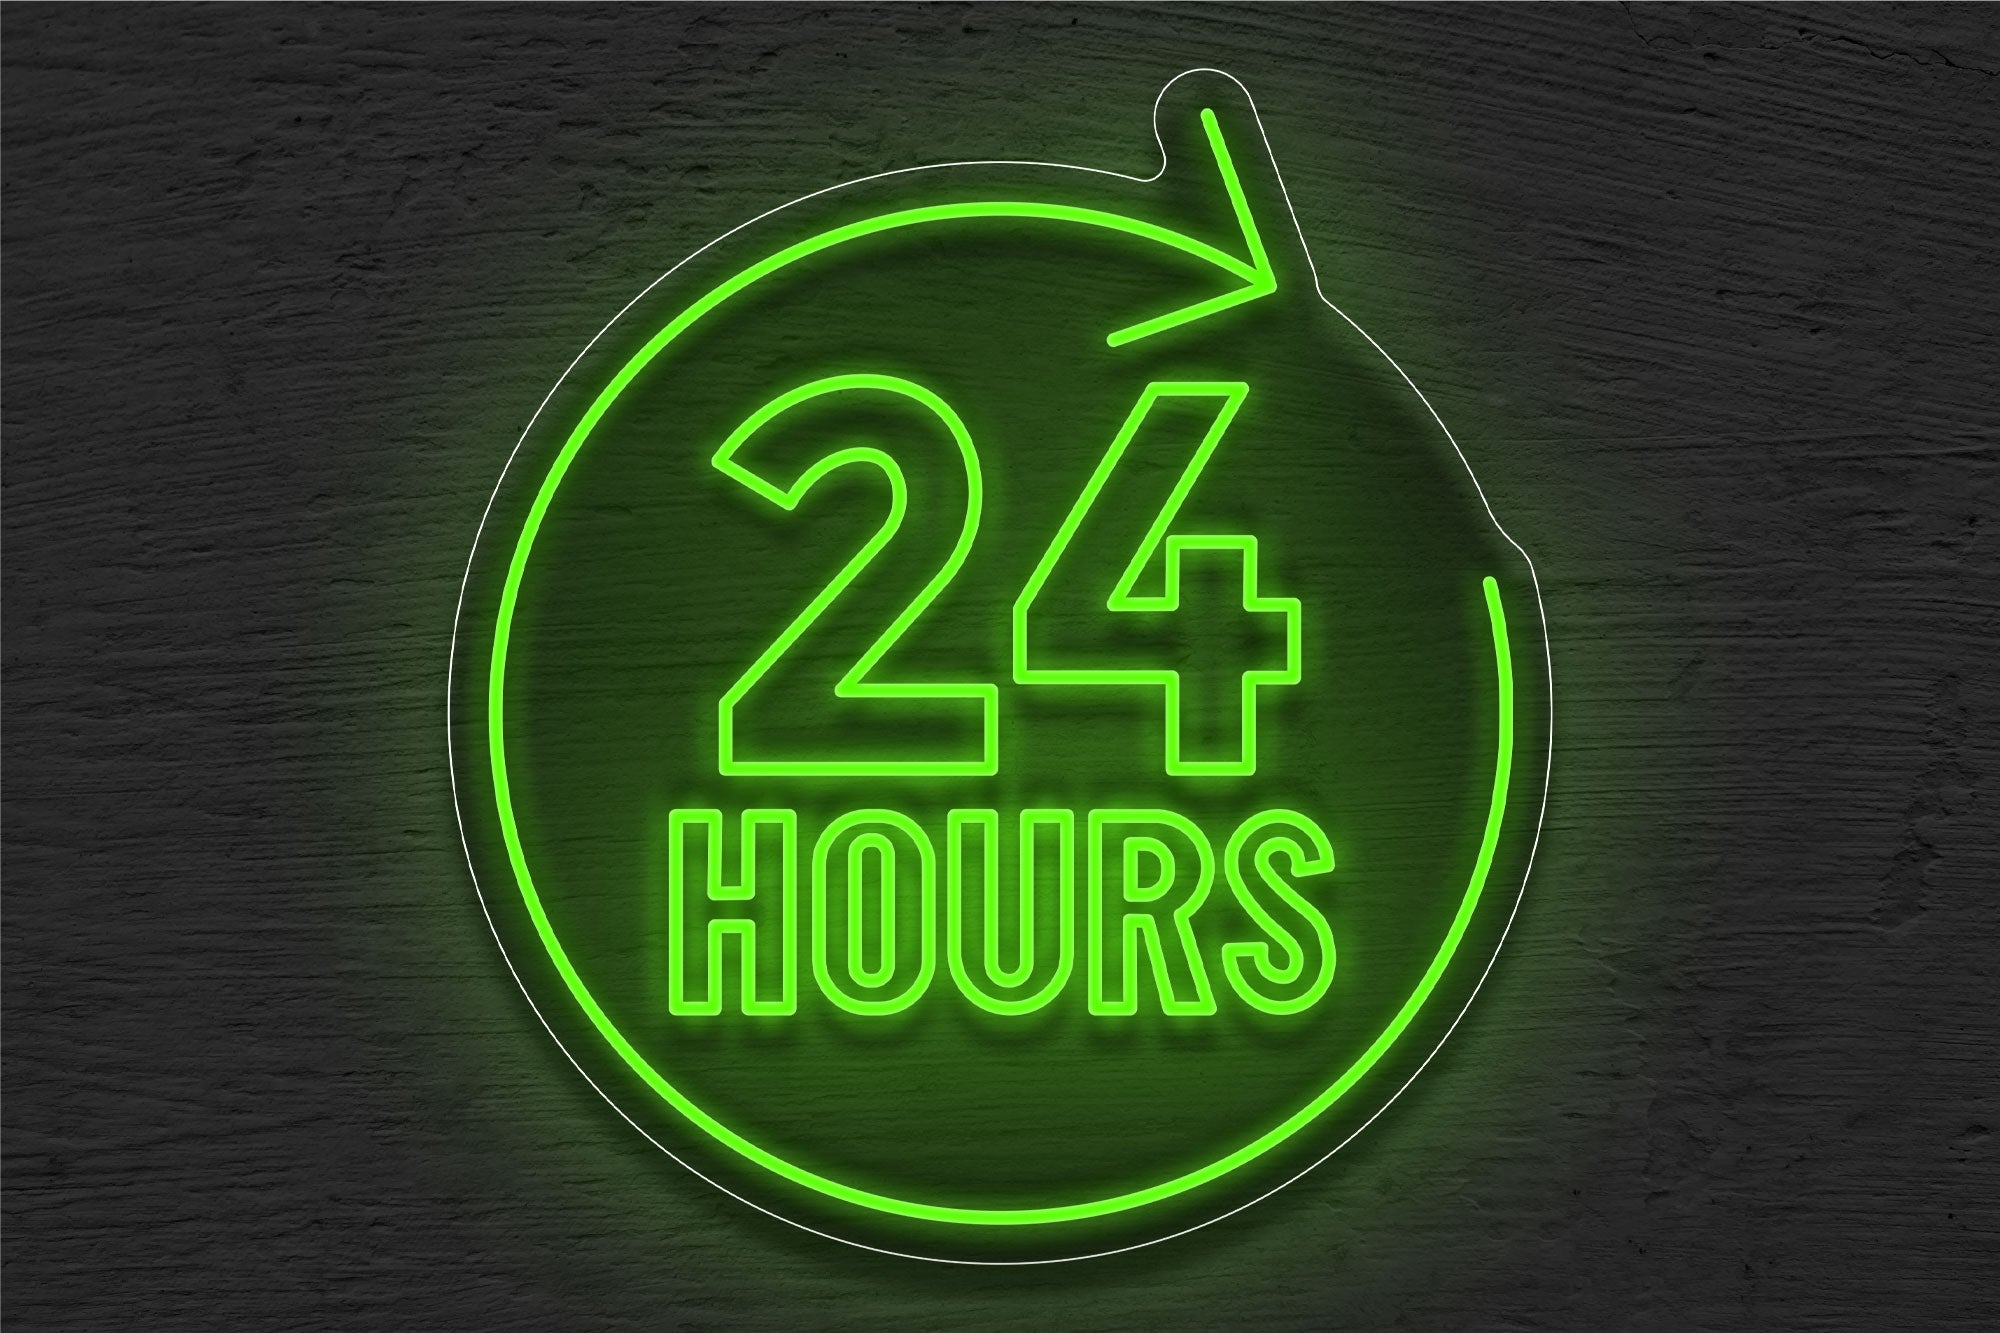 24 Hours with Arrow border LED Neon Sign